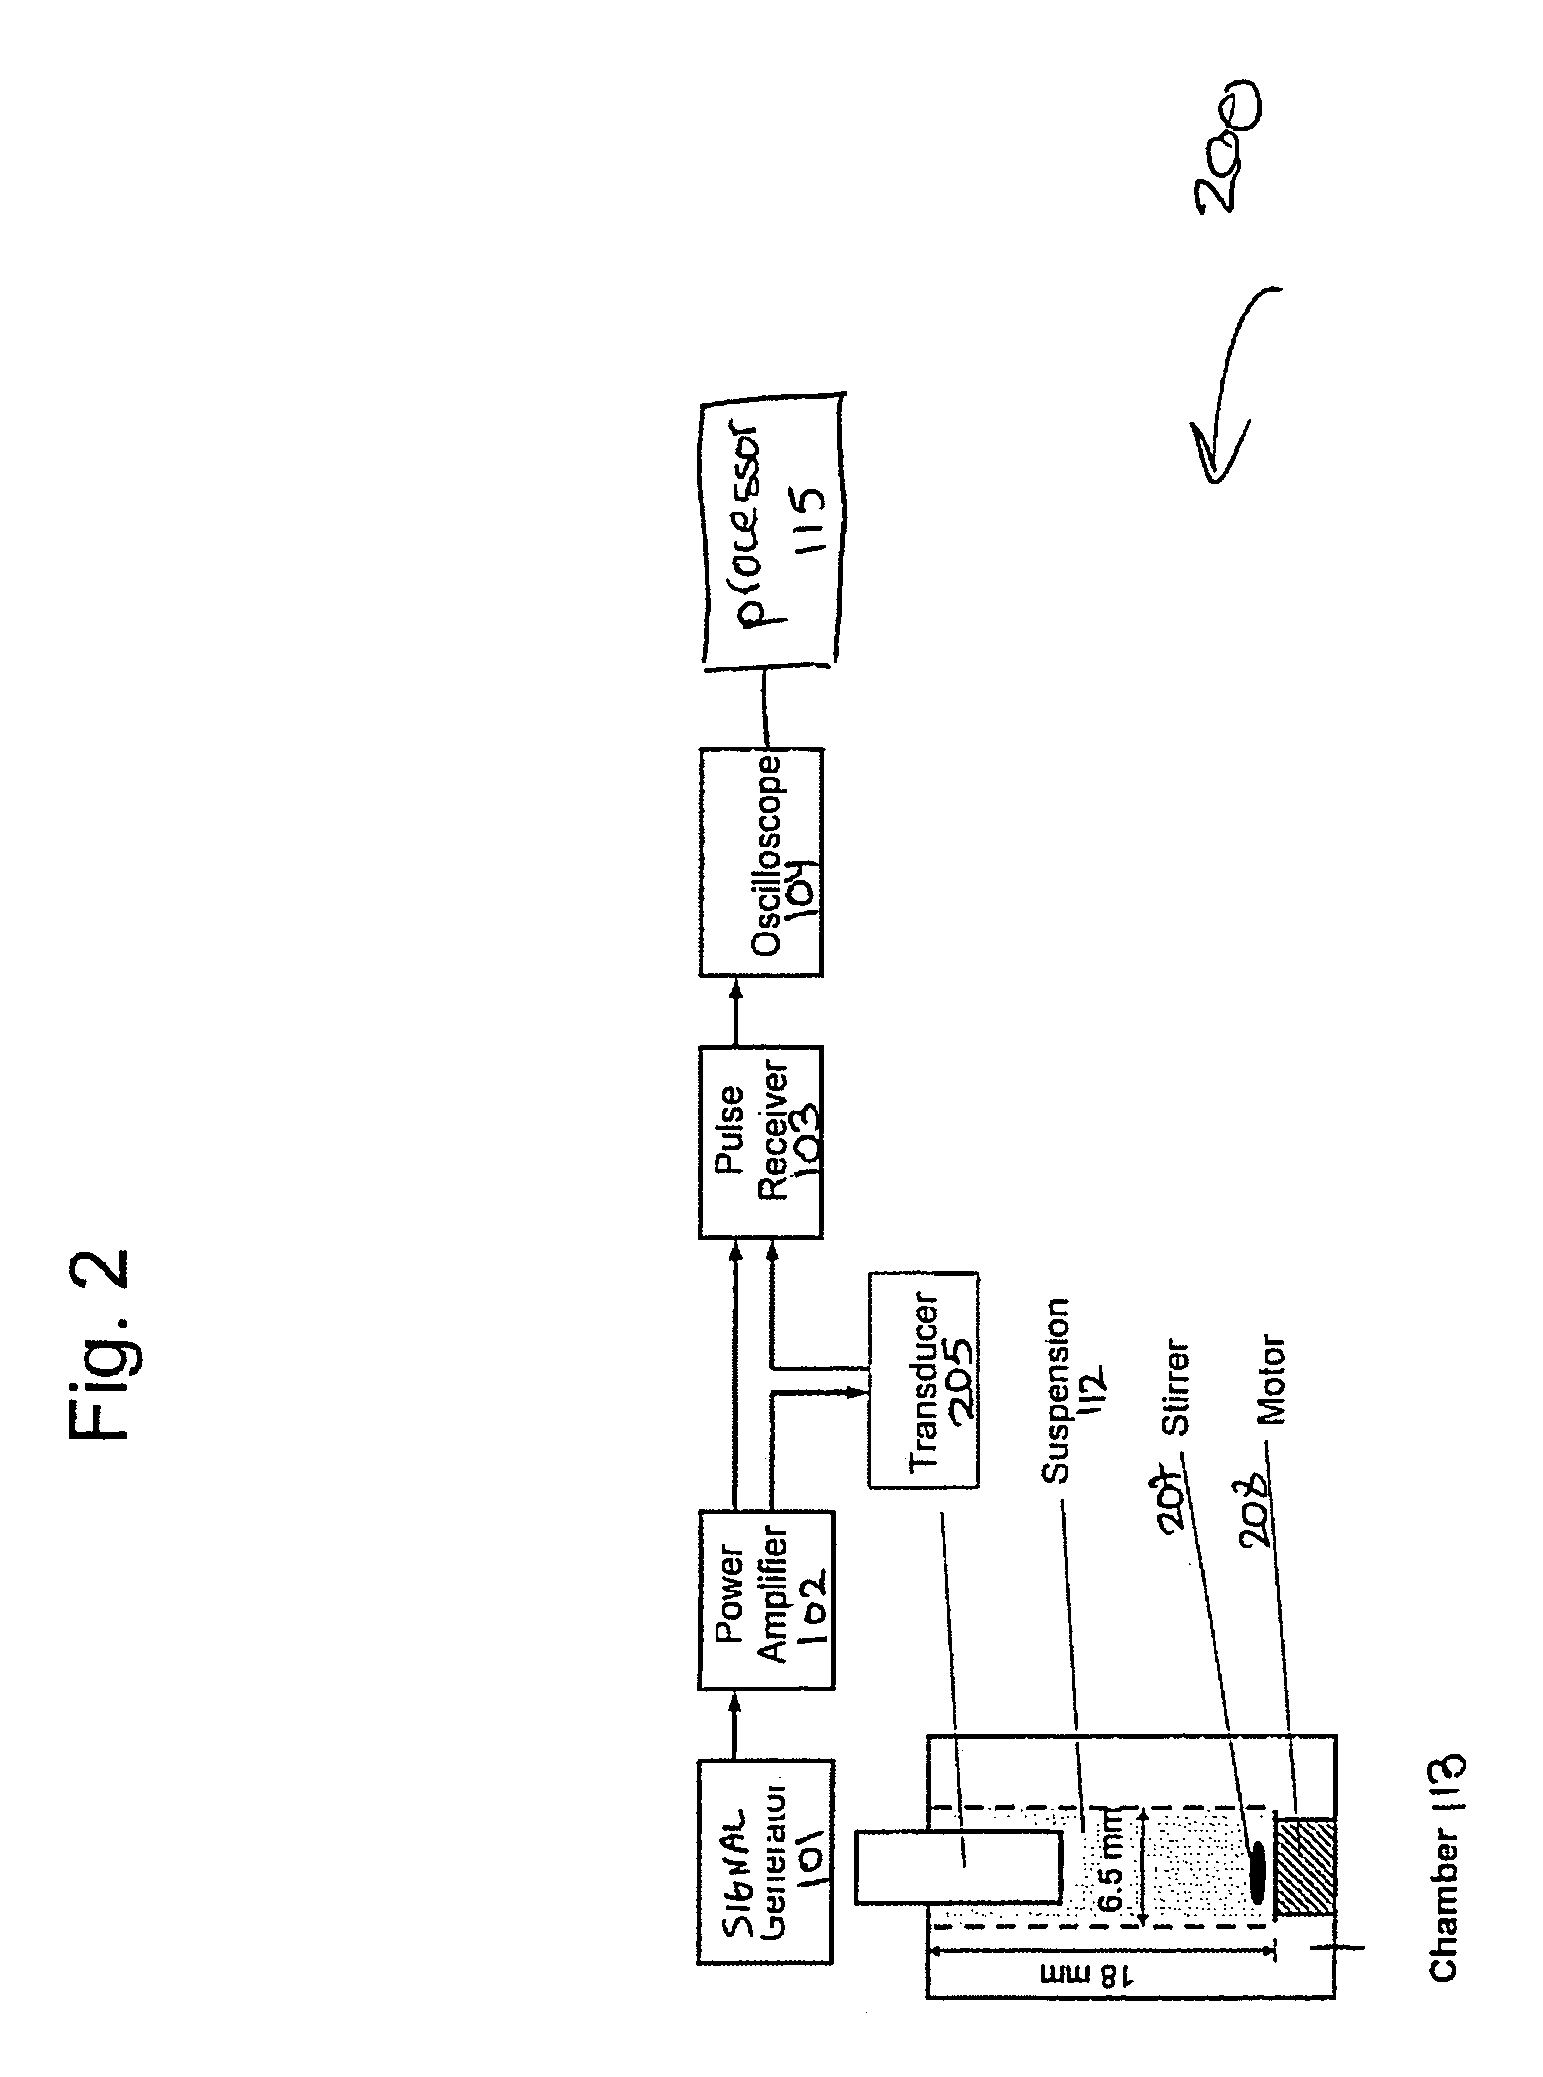 System and method for ultrasonic measuring of particle properties